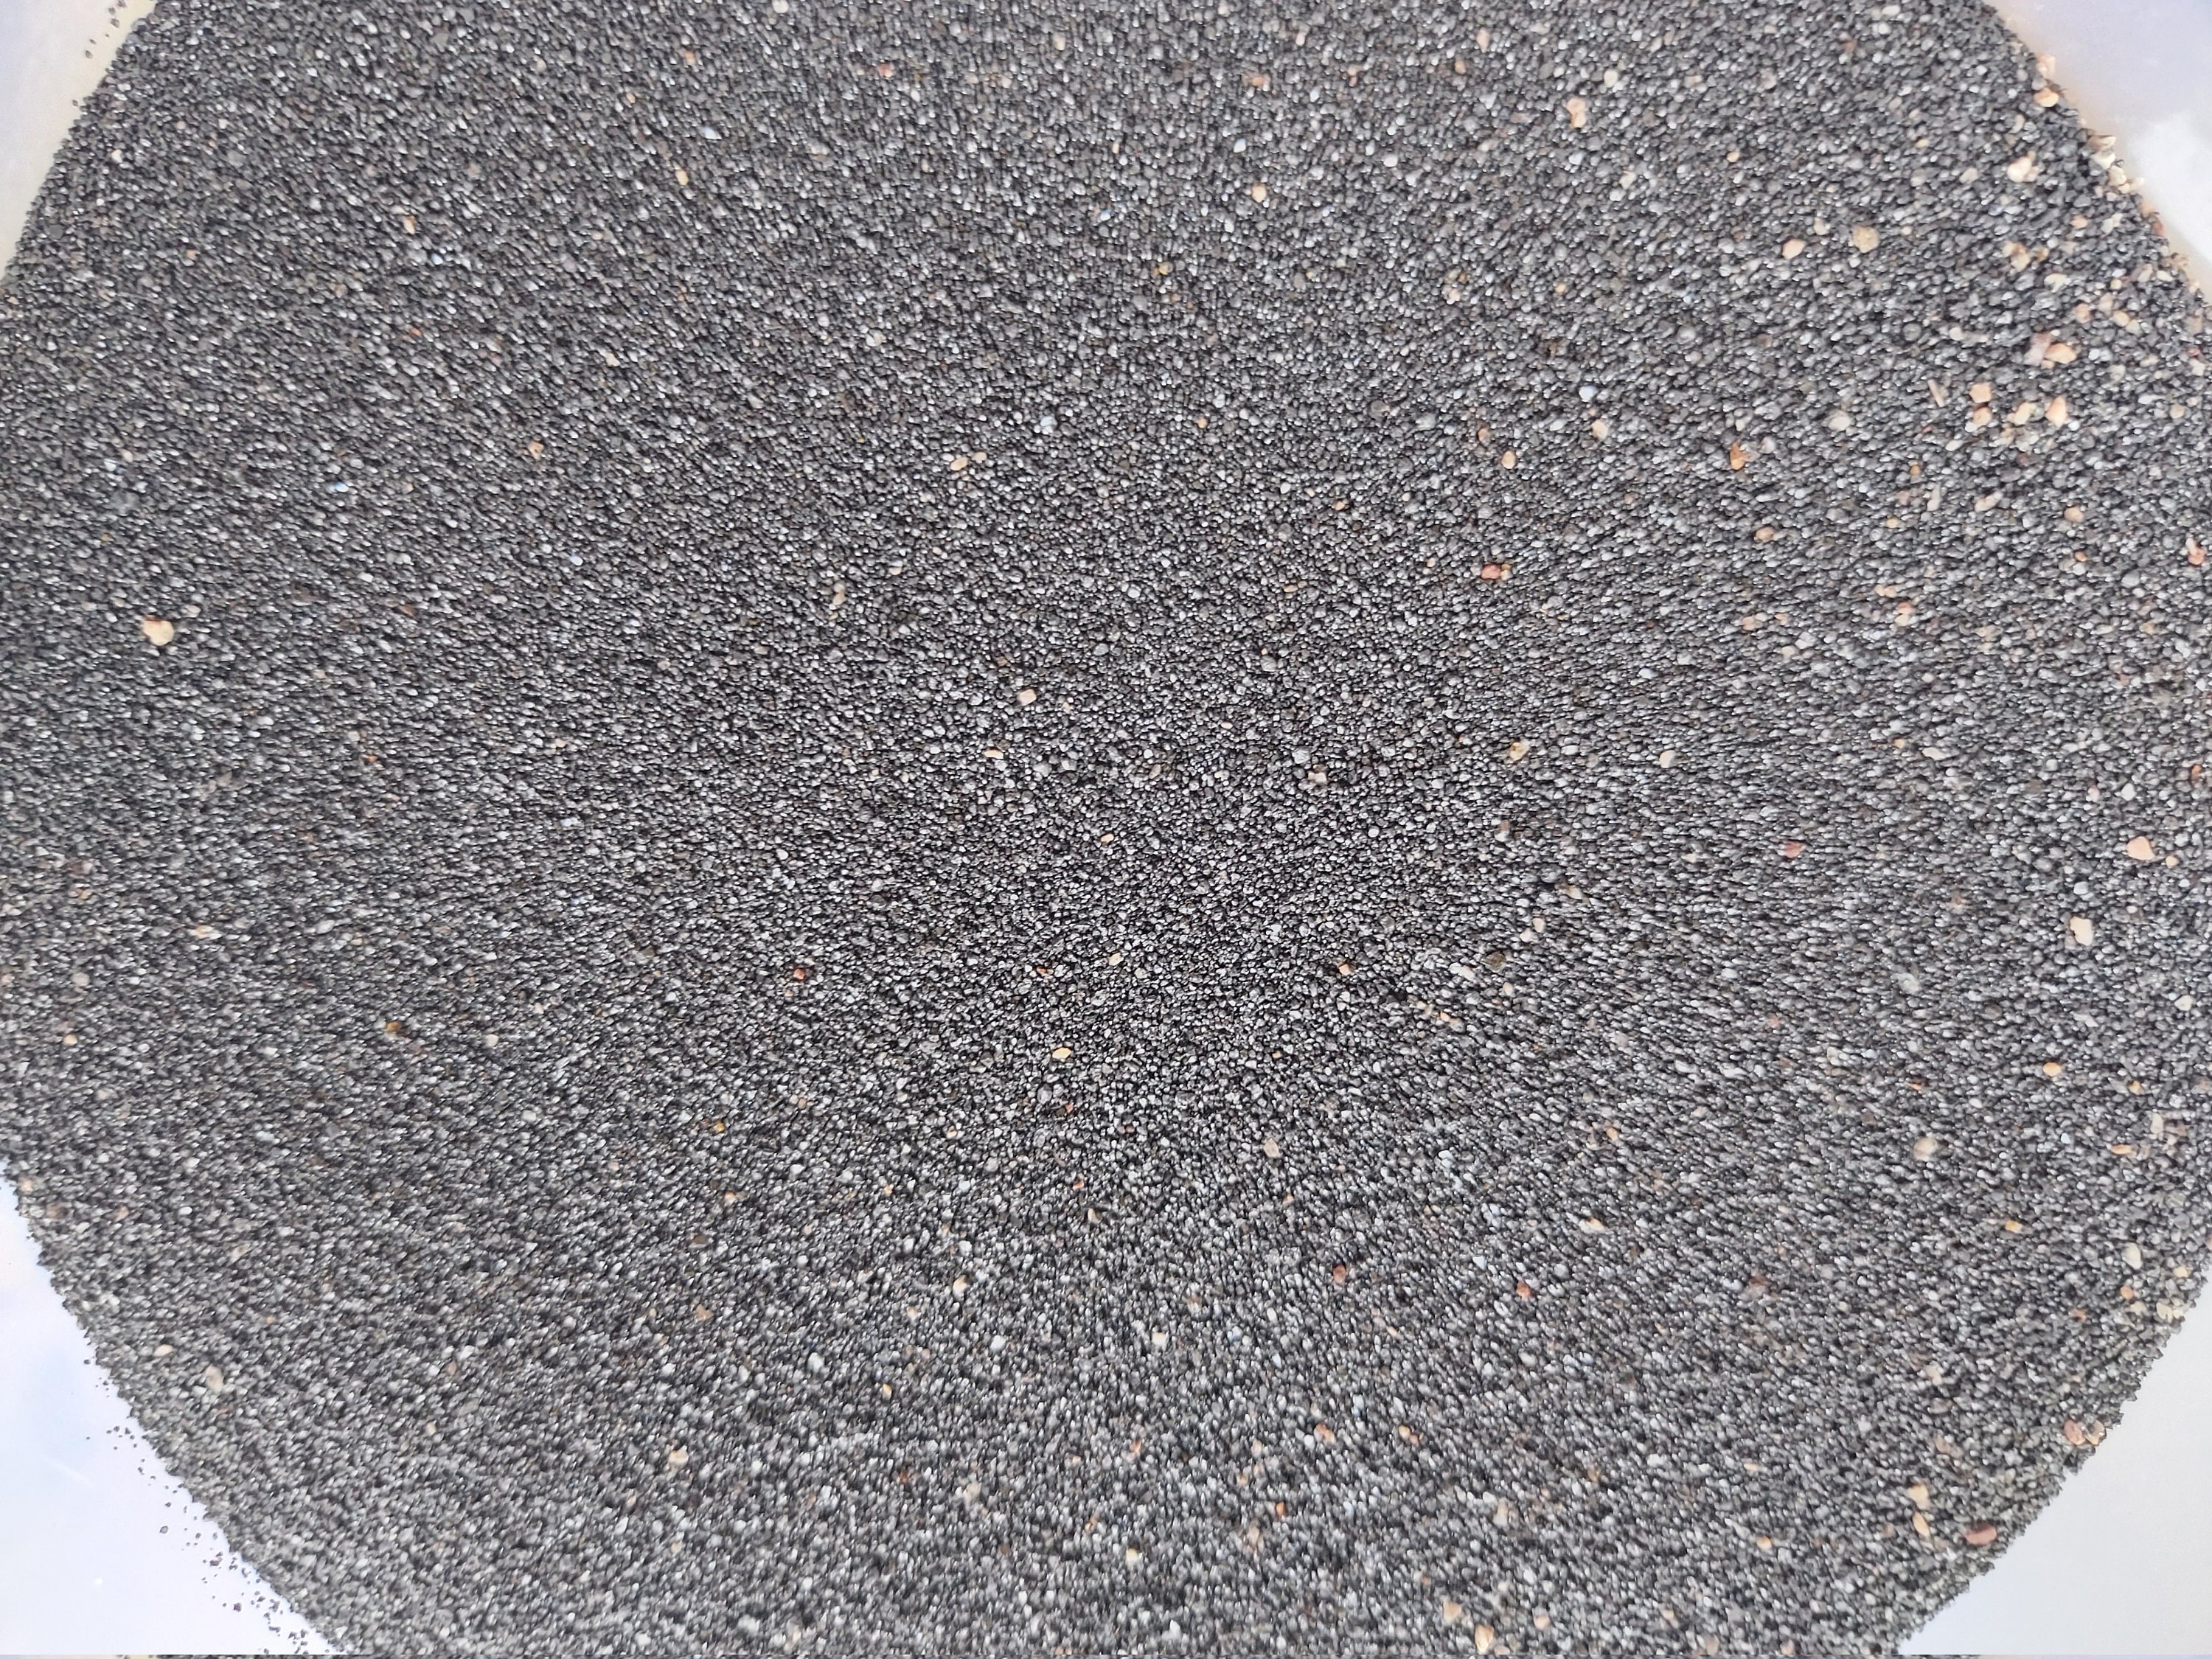 See below EXTREME REFINED or REFINED ARIZONA MAGNETIC BLACK SAND MAGNETITE 